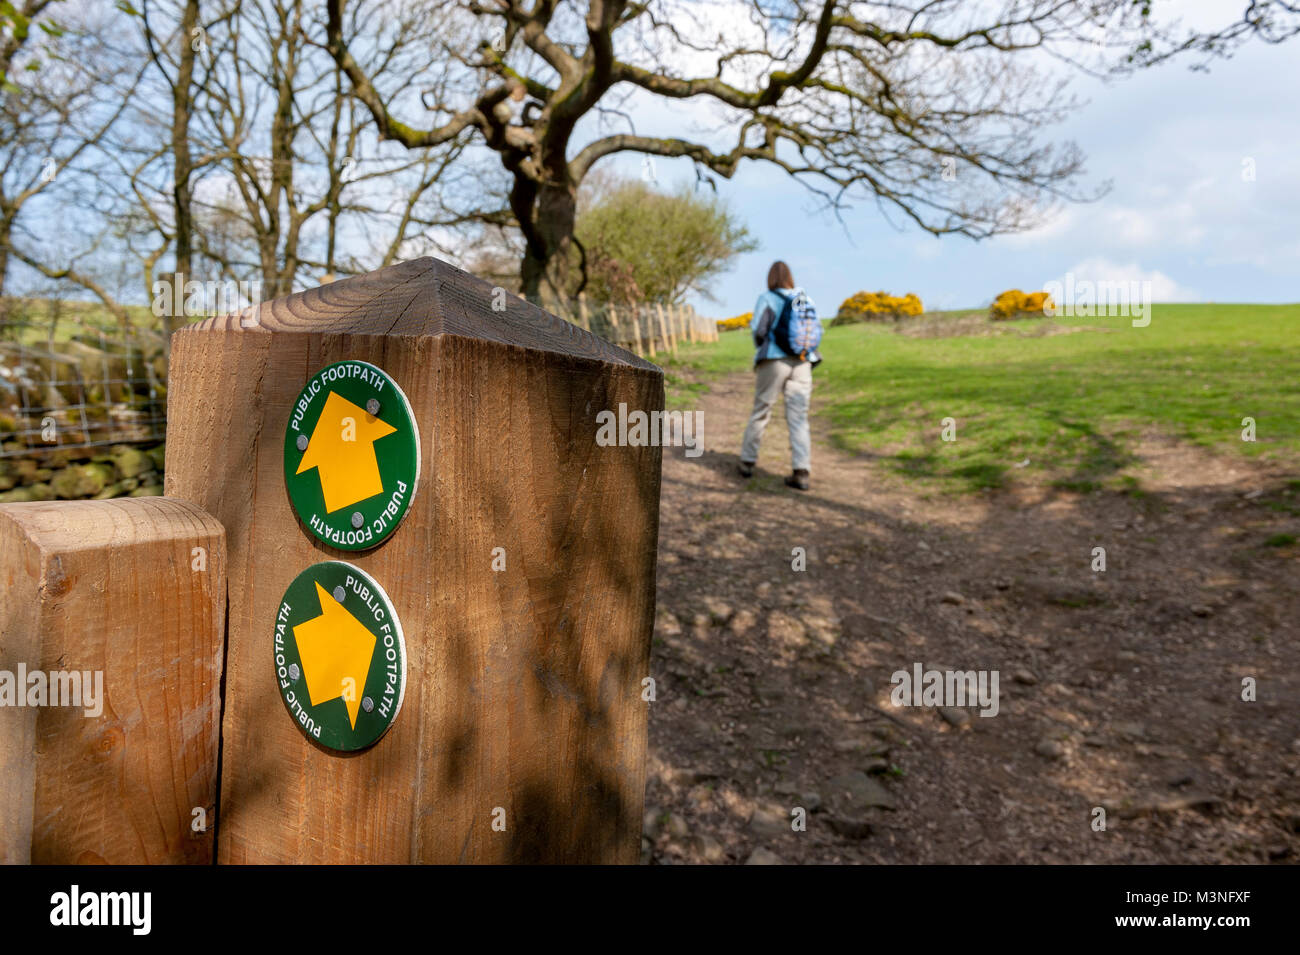 Public footpath arrows guiding walkers along the Lancashire moorland footpaths Stock Photo